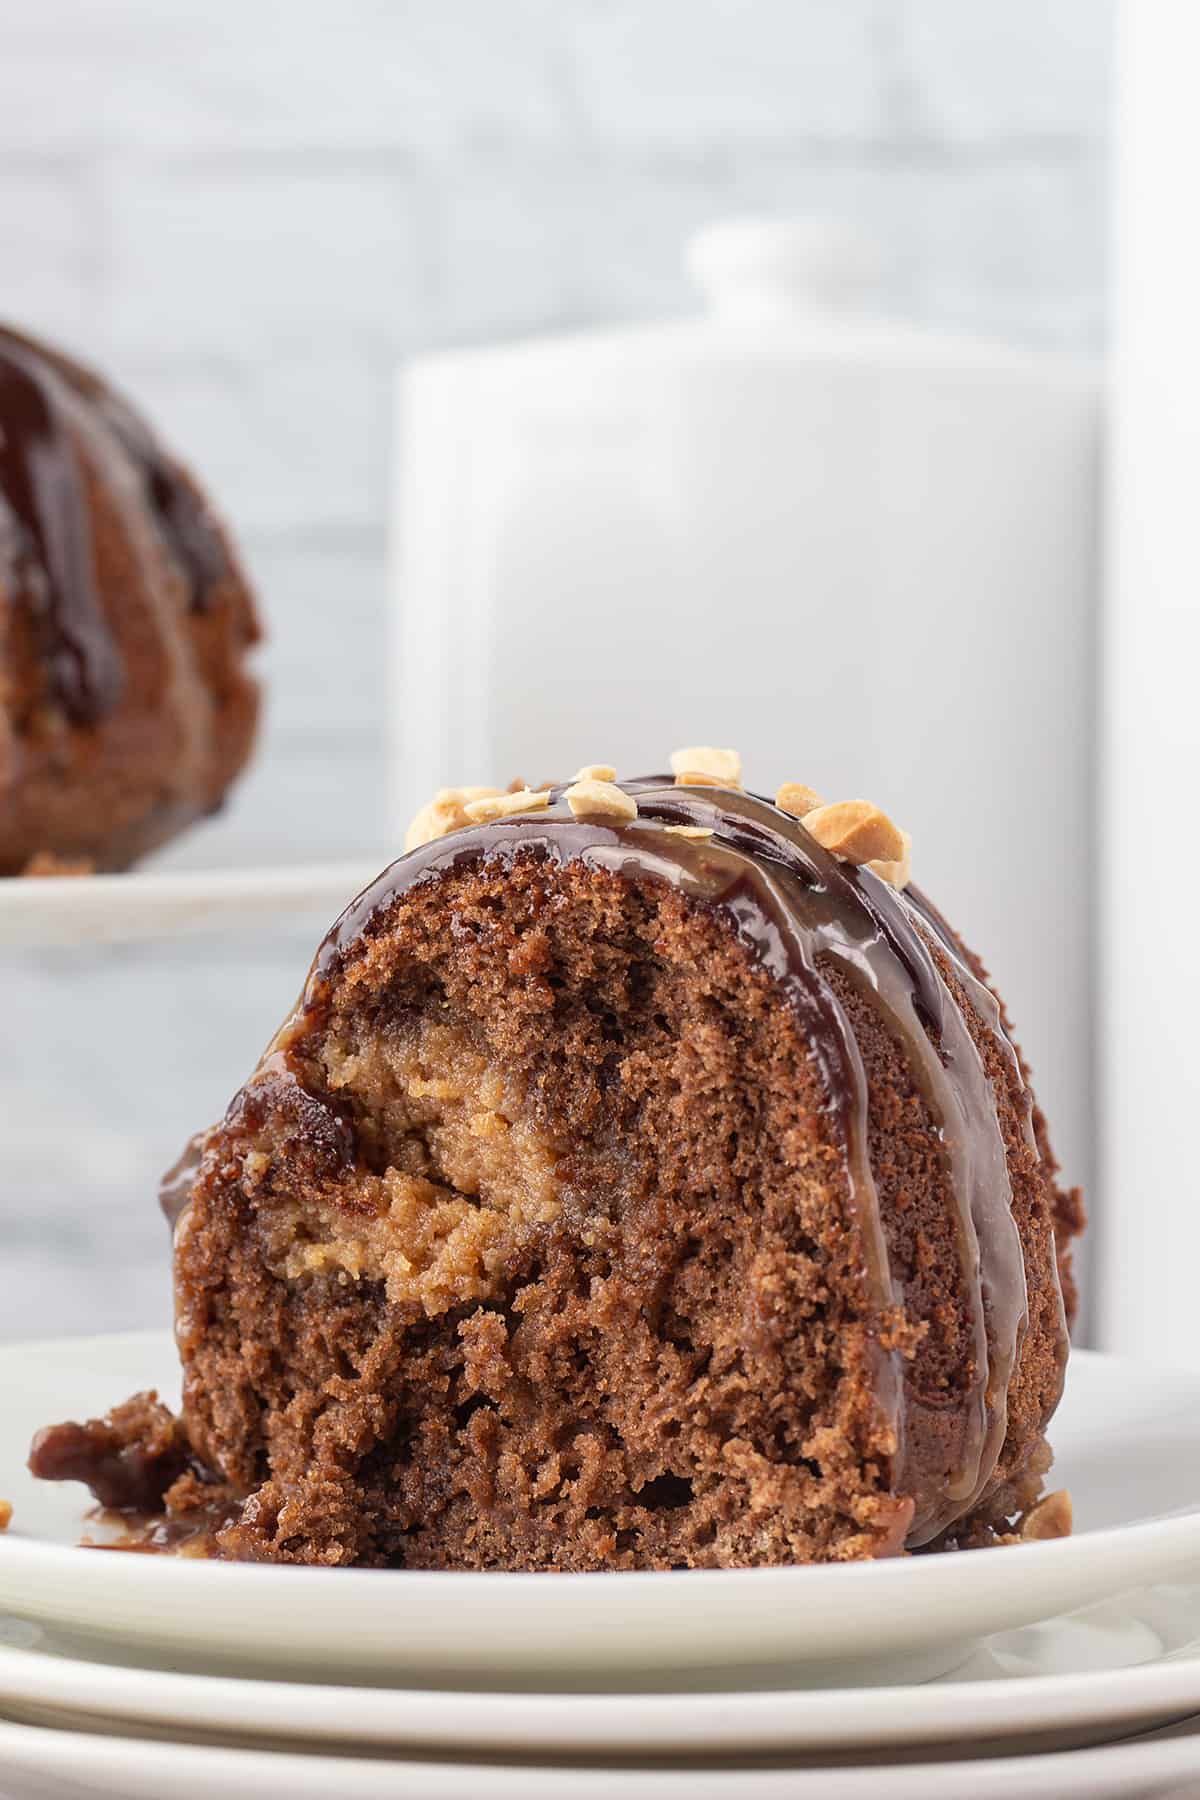 chocolate bundt cake with a peanut butter filling on a white plate.